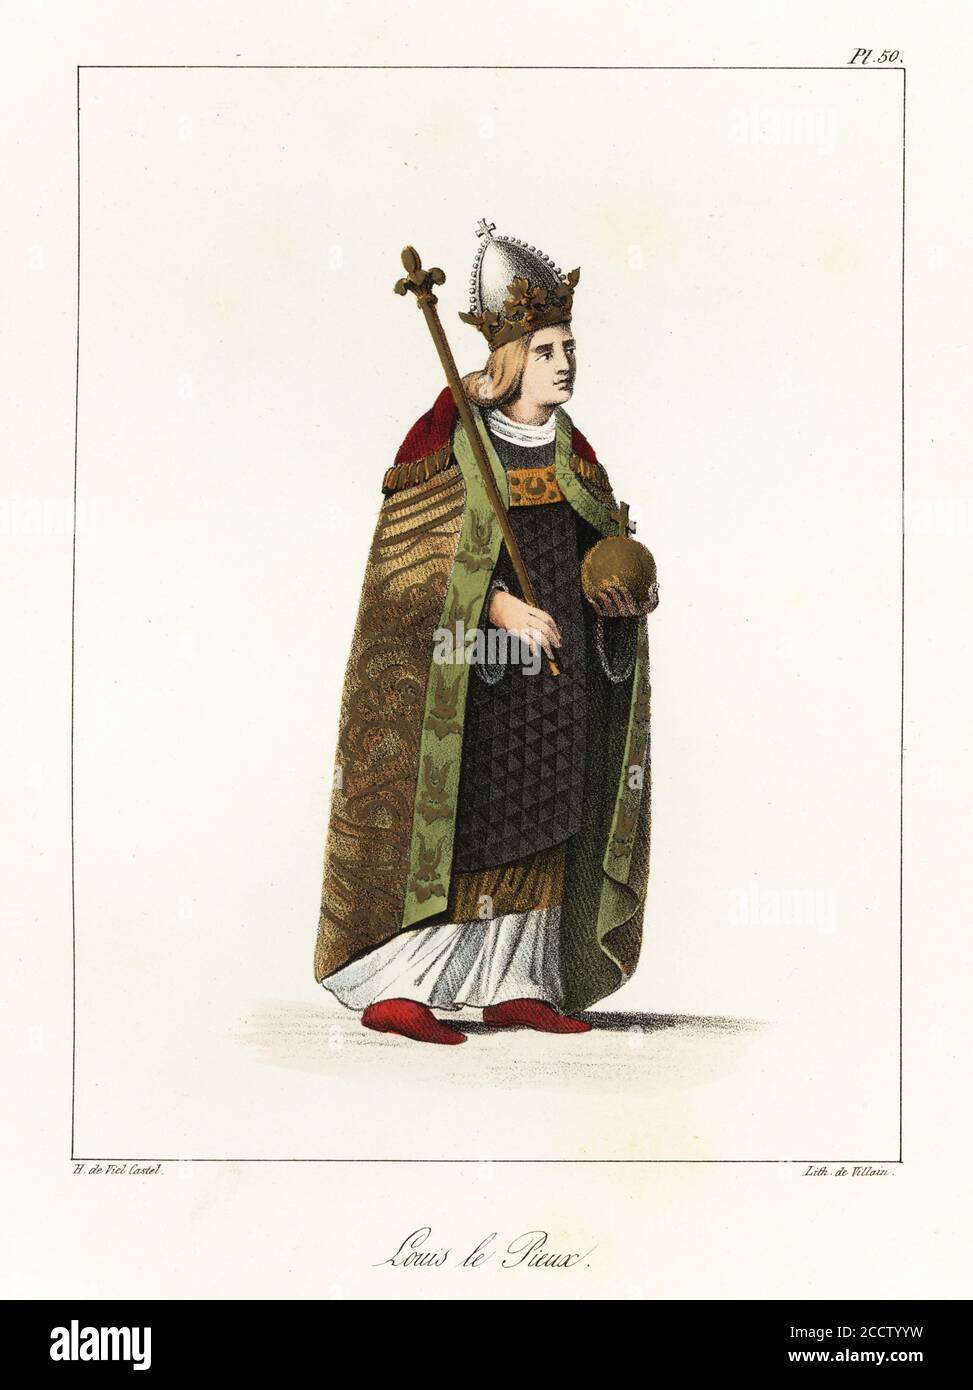 Louis the Pious, King of the Franks, co-emperor with his father, Charlemagne, 778-840. In crown with orb and sceptre, chlamys over chasuble and ecclesiastical robes. Louis le Pieux. Handcoloured lithograph by Villain after an illustration by Horace de Viel-Castel from his Collection des costumes, armes et meubles pour servir à l'histoire de la France (Collection of costumes, weapons and furniture to be used in the history of France), Treuttel & Wurtz, Bossange, 1827. Stock Photo